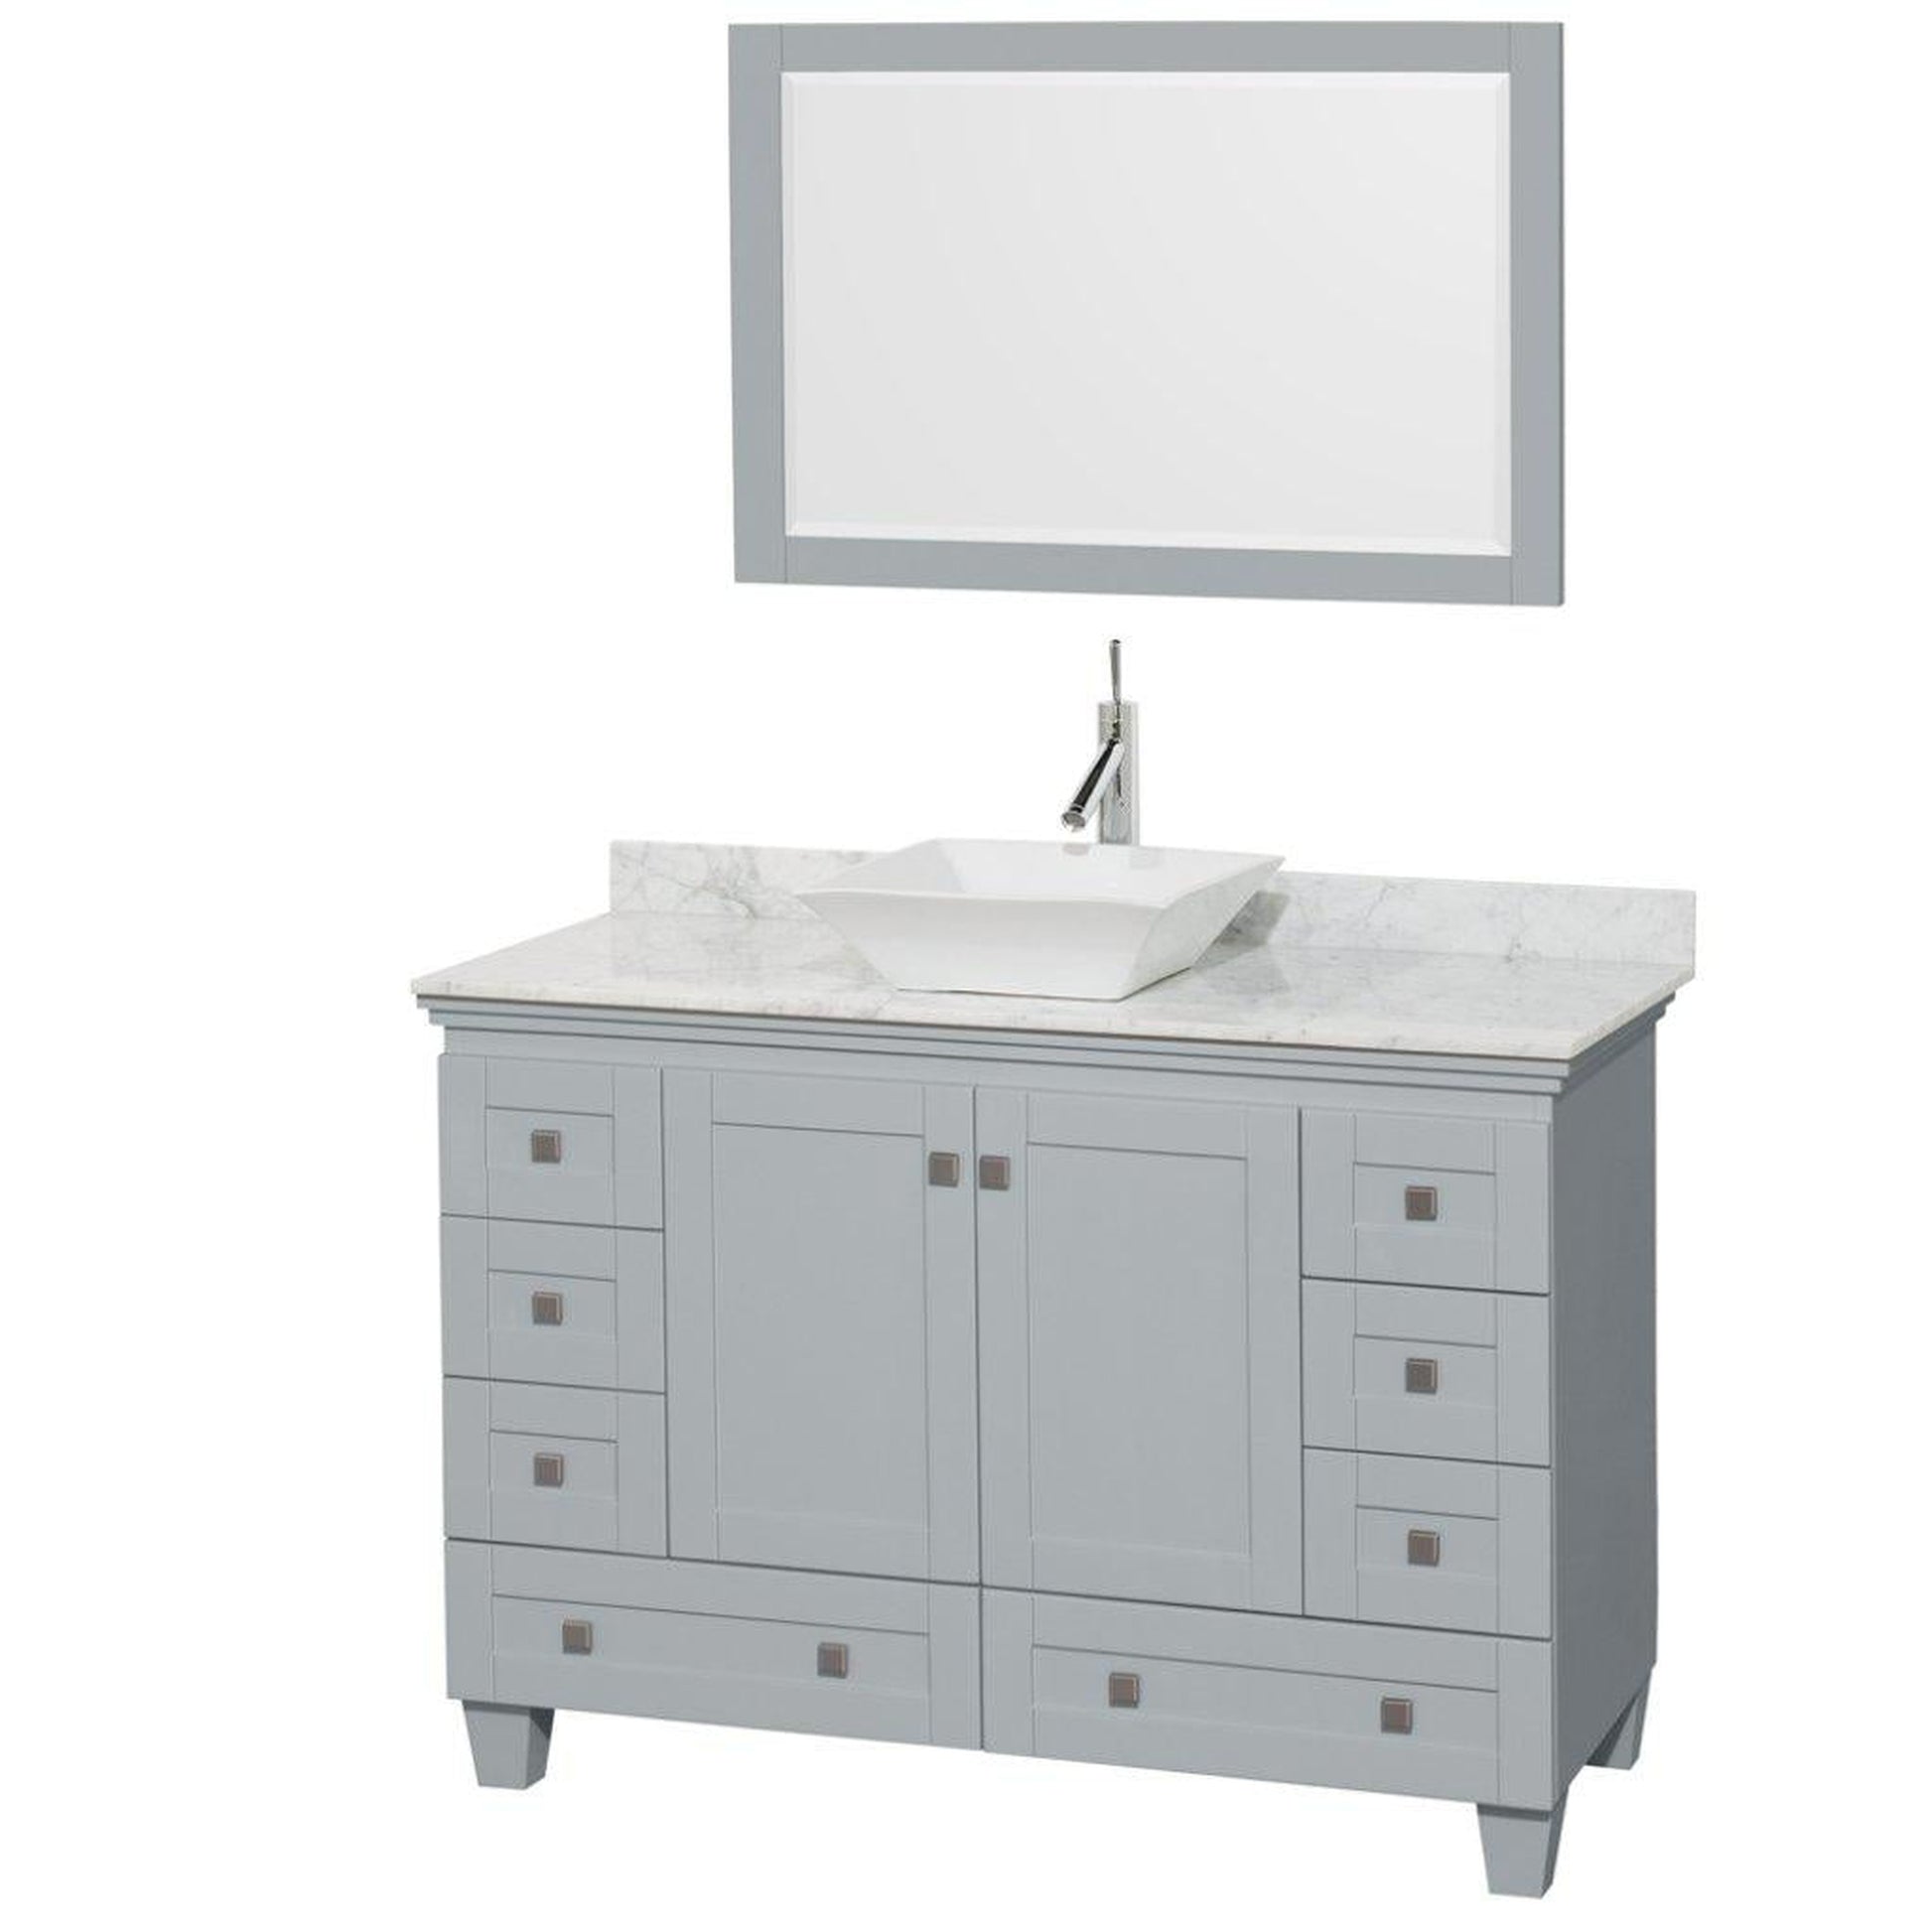 Wyndham Collection Acclaim 48" Single Bathroom Oyster Gray Vanity Set With White Carrara Marble Countertop And Pyra White Porcelain Sink And 24" Mirror